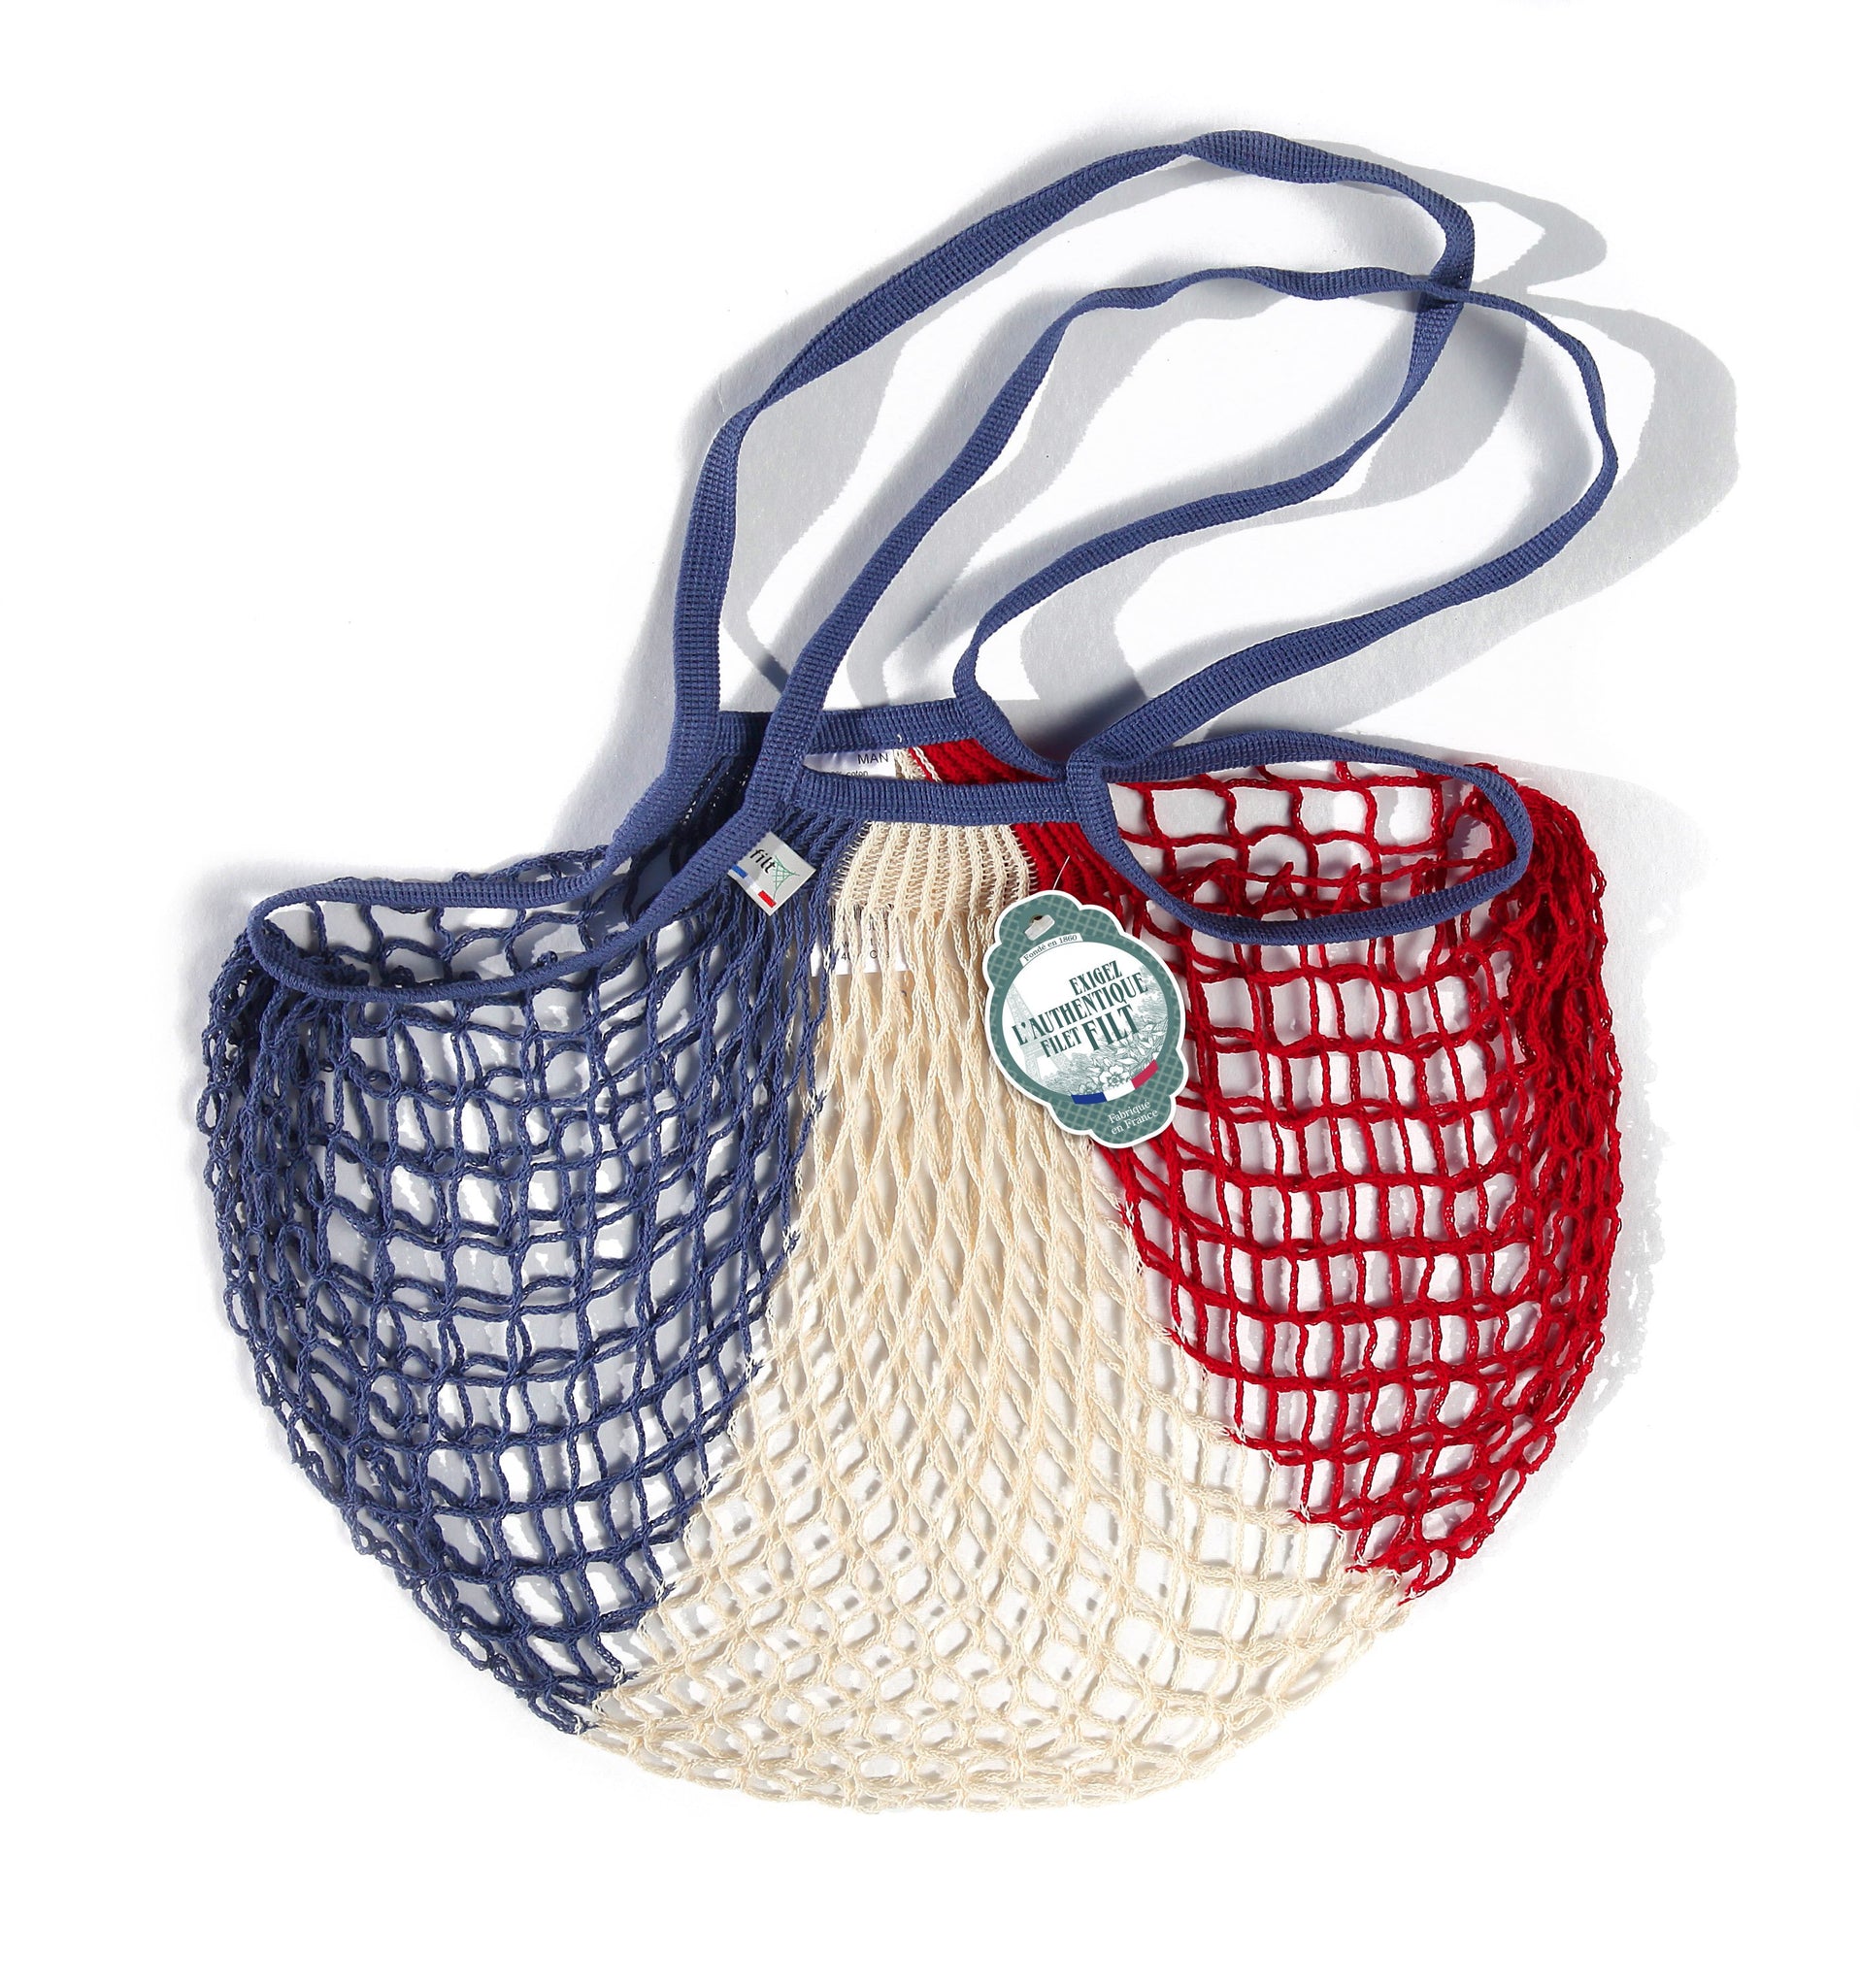 Red white and blue netted tote bag with hang tag reading Exigez l'authentique filet filt. Fabrique en France.